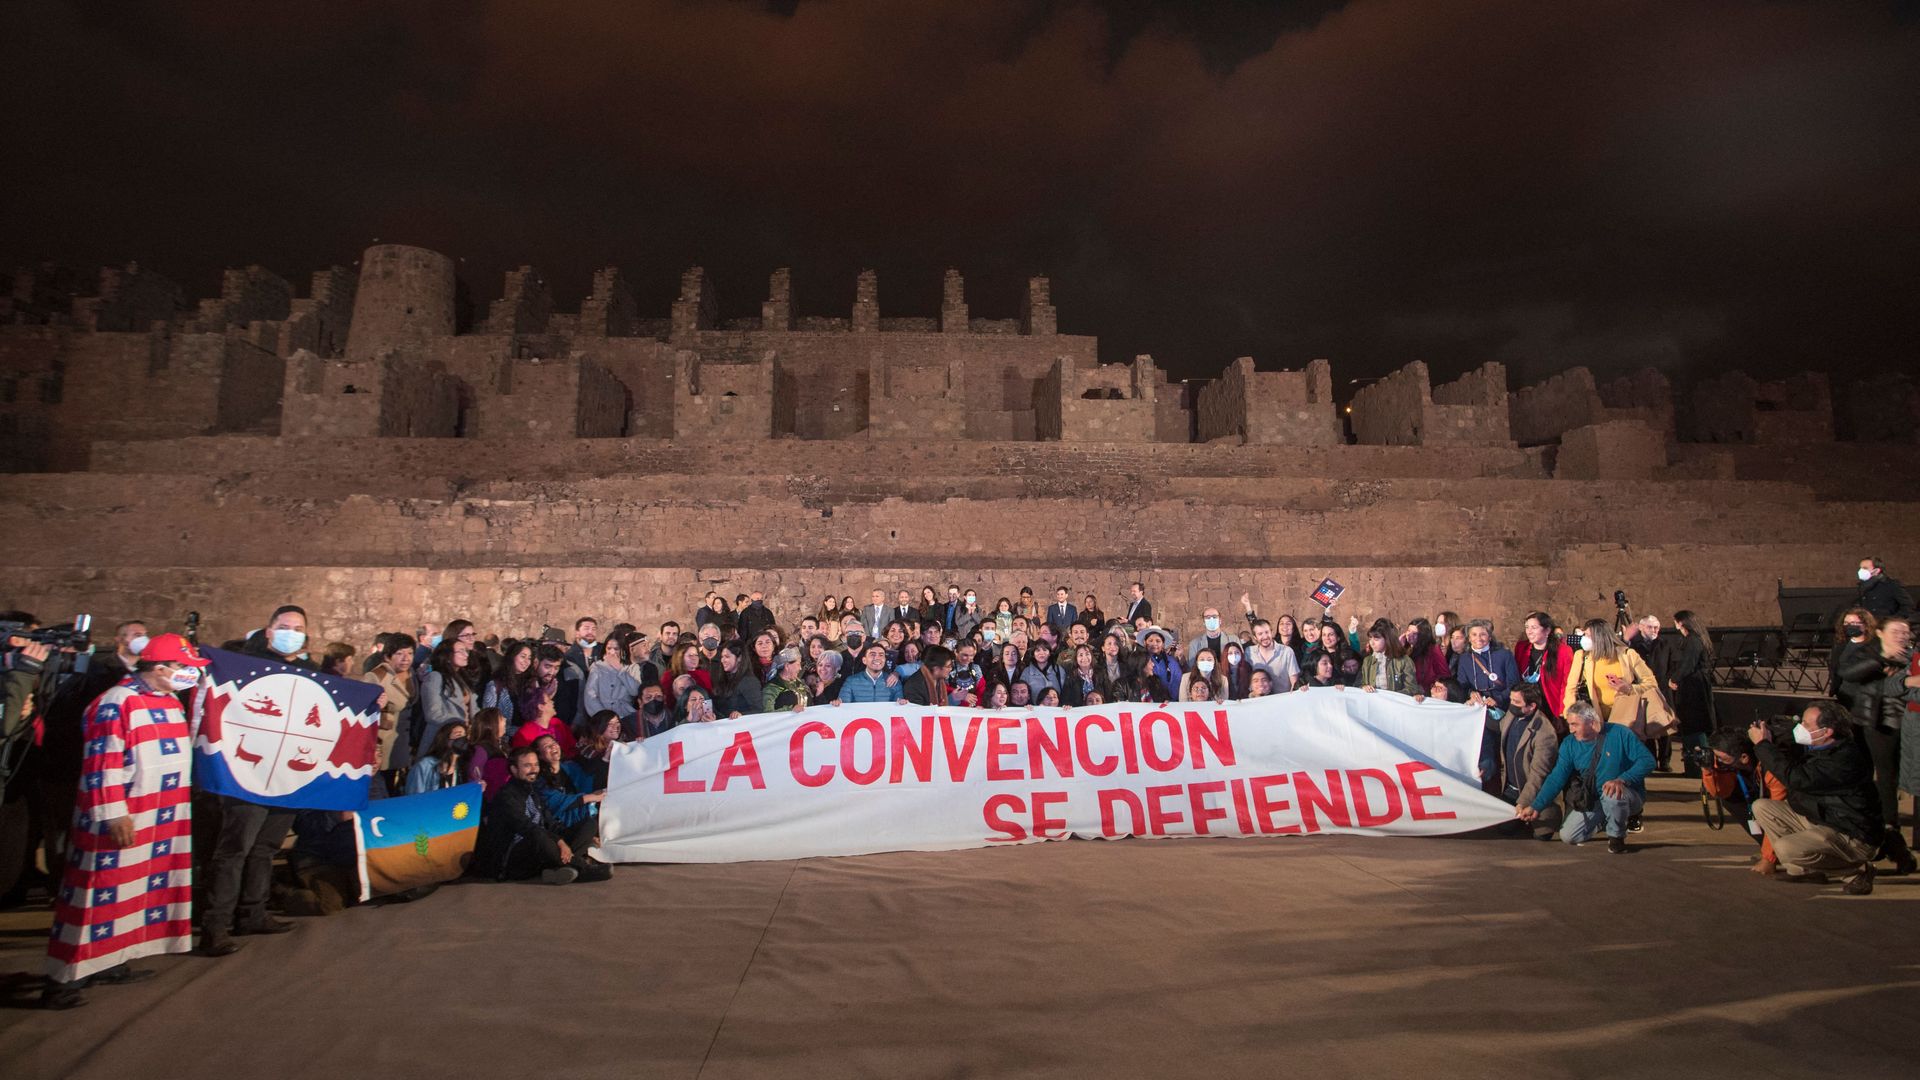 A large group of people writing Chile's new constitution pose behind a large banner that says "we defend the convention" after finishing a draft on Tuesday 